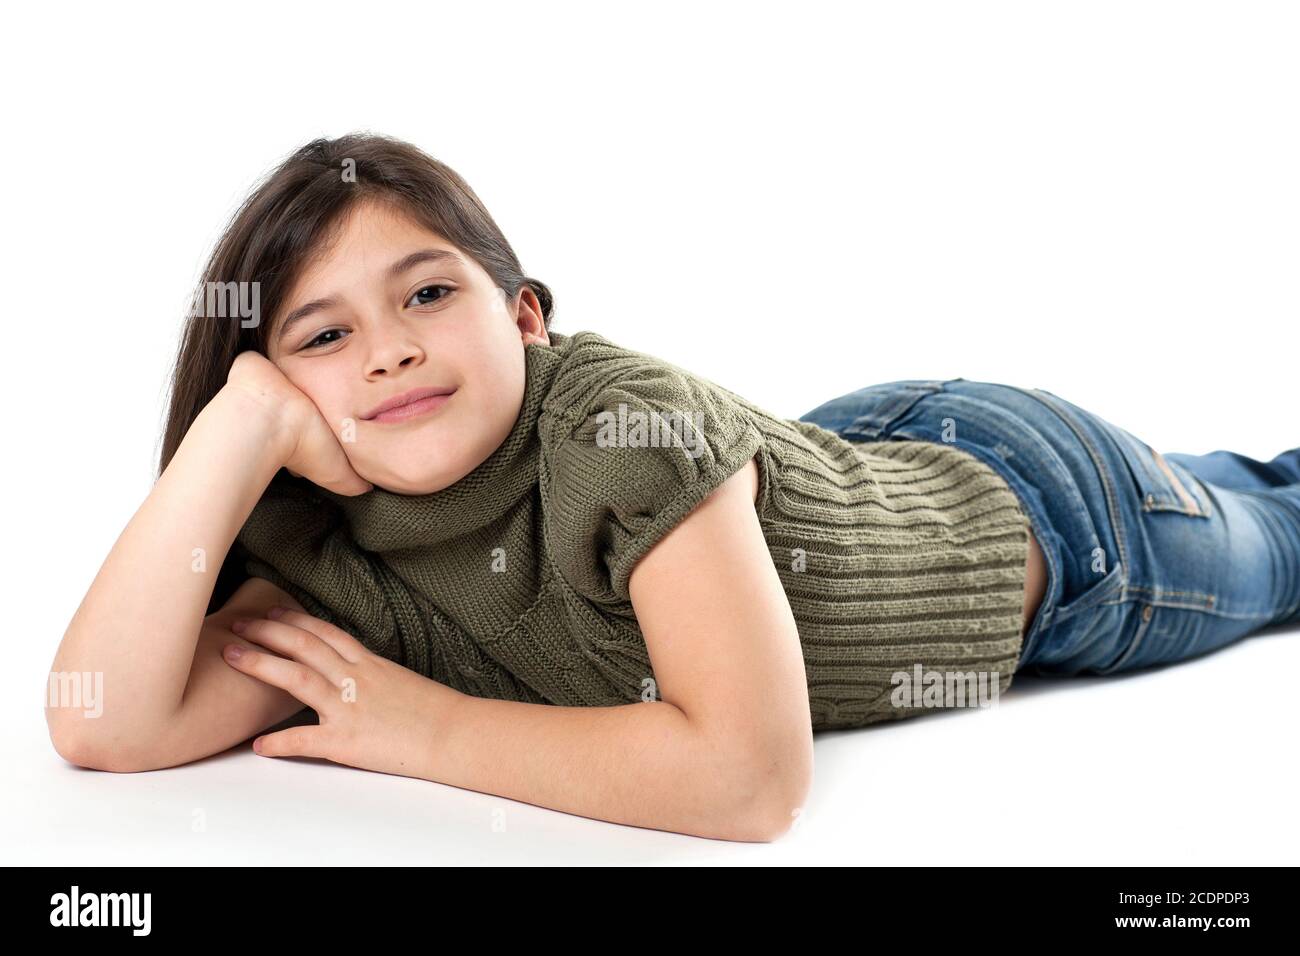 On the floor lying young girl front in of white background Stock Photo